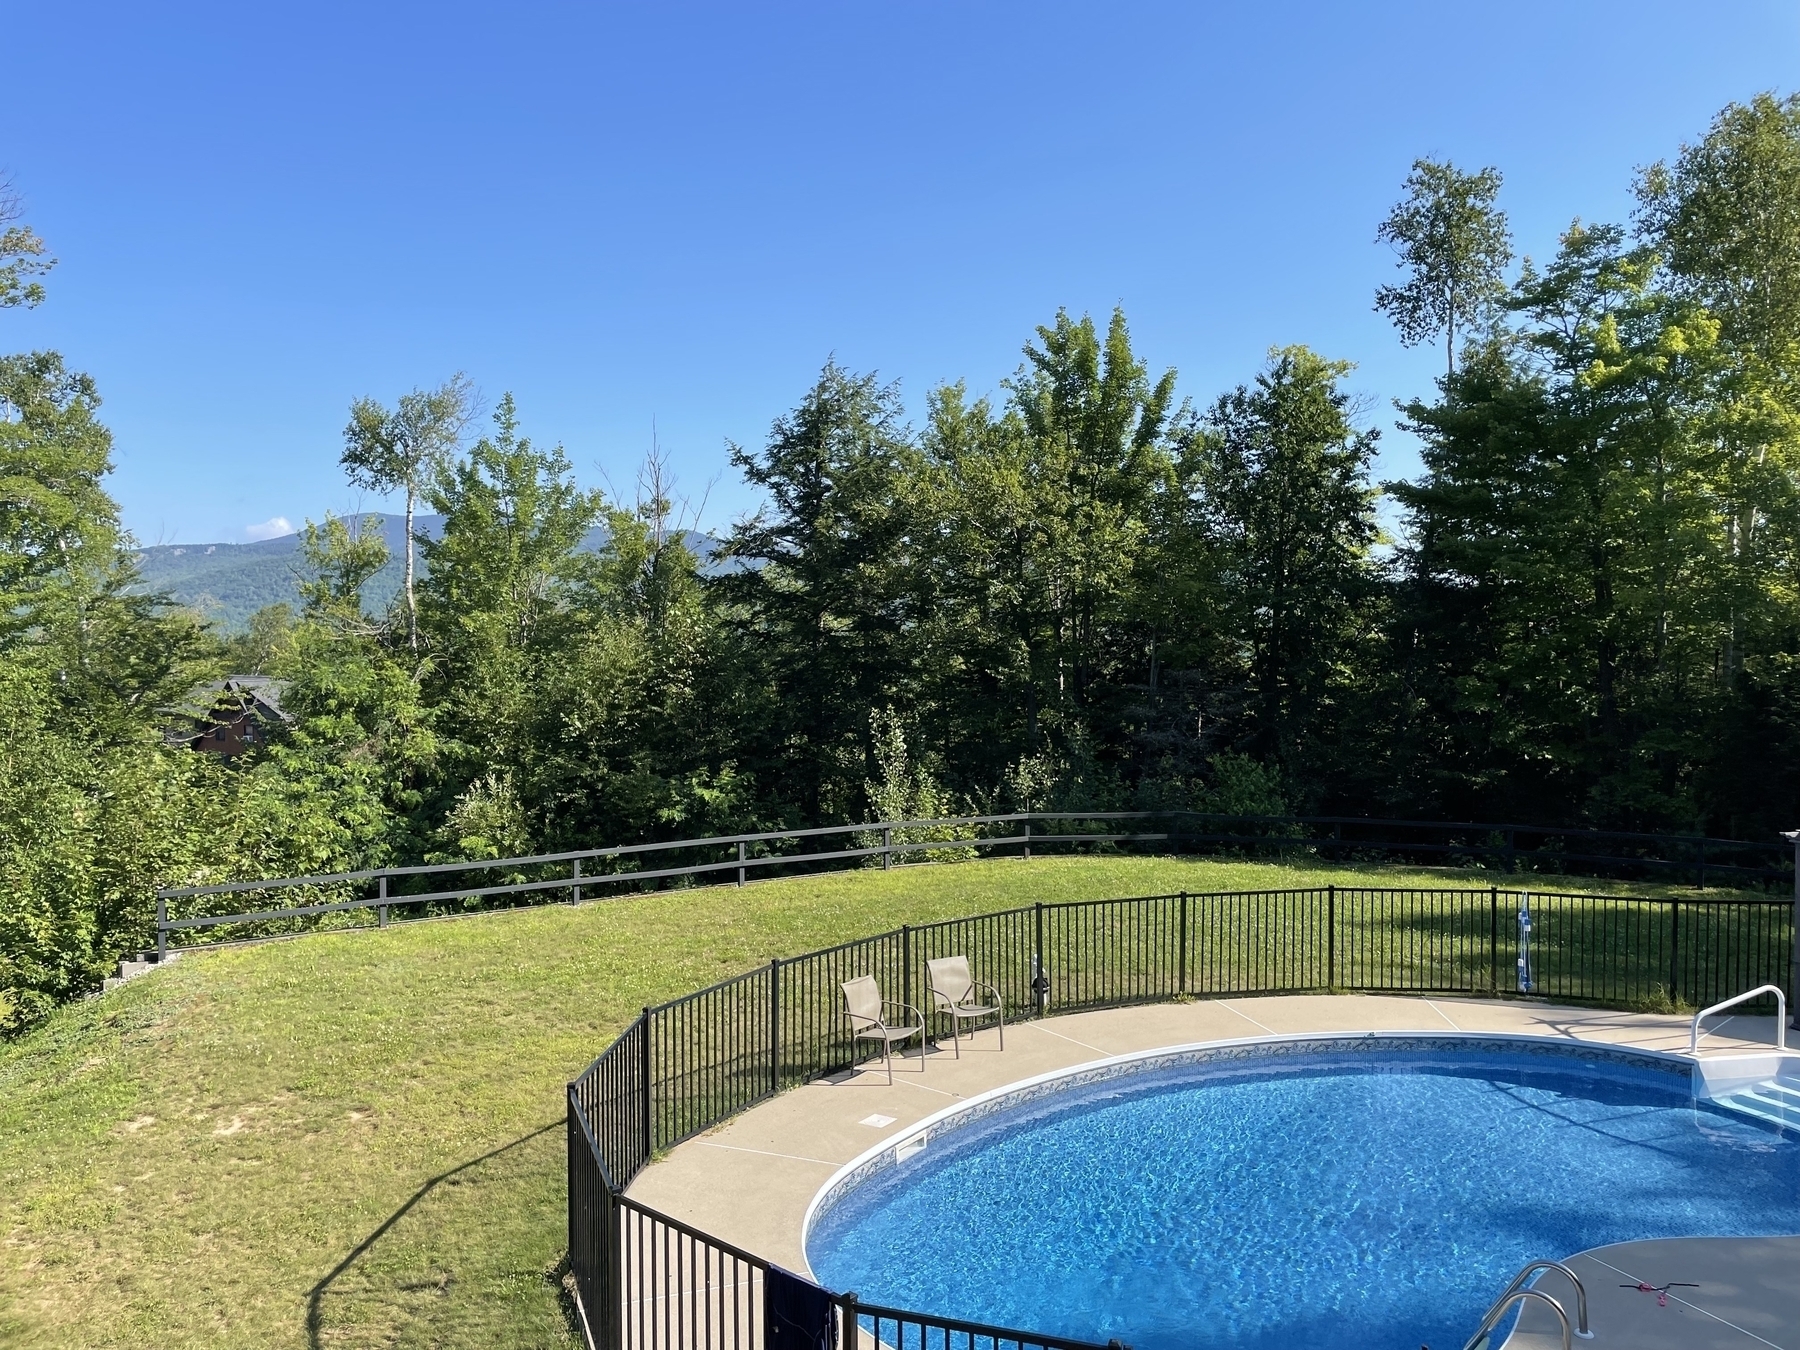 Pool and Mountain View with blue sky